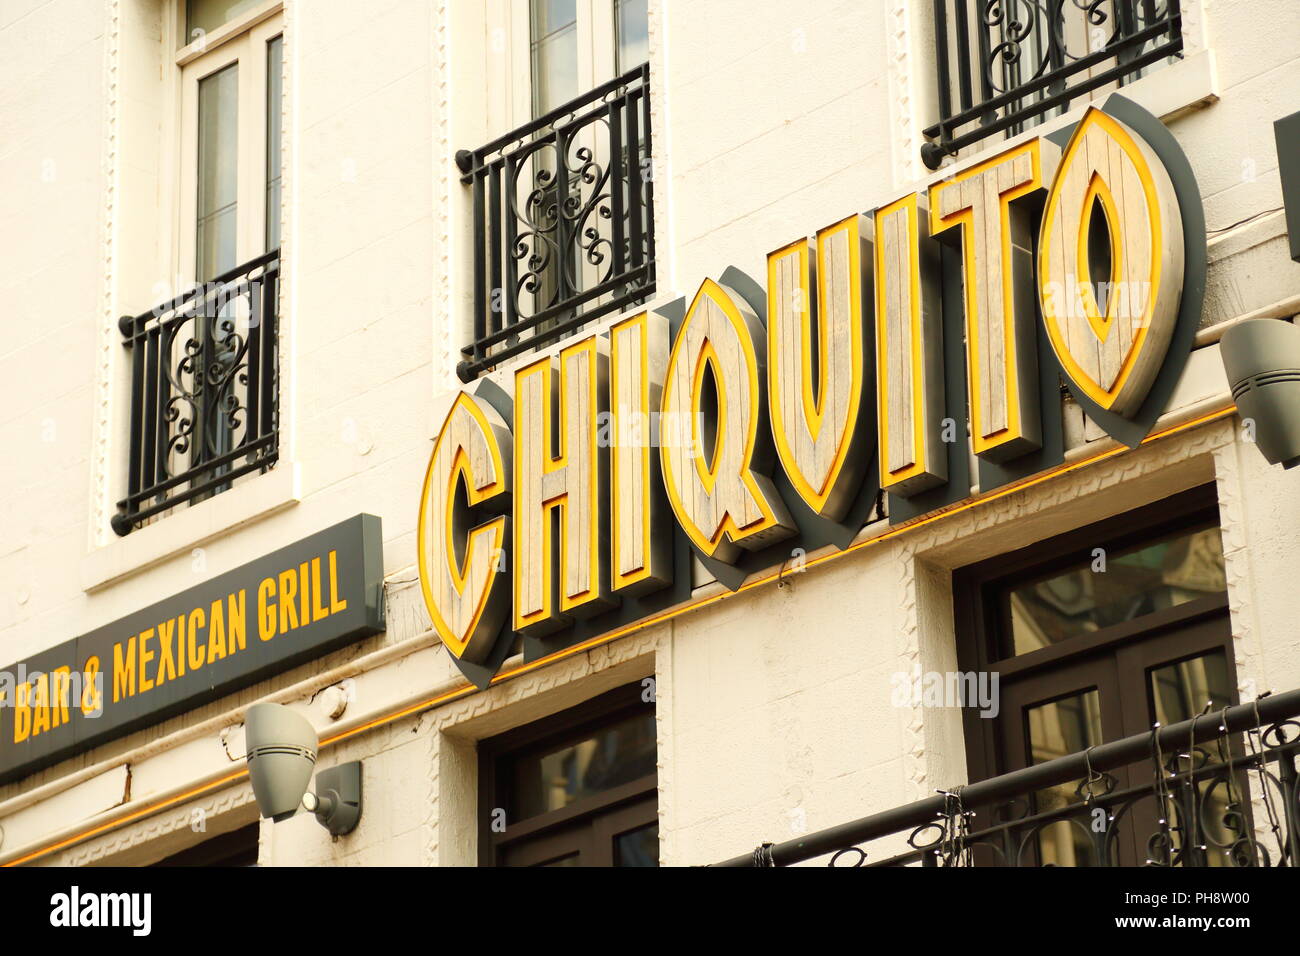 Chiquito sign at Leicester Square, London, UK Stock Photo